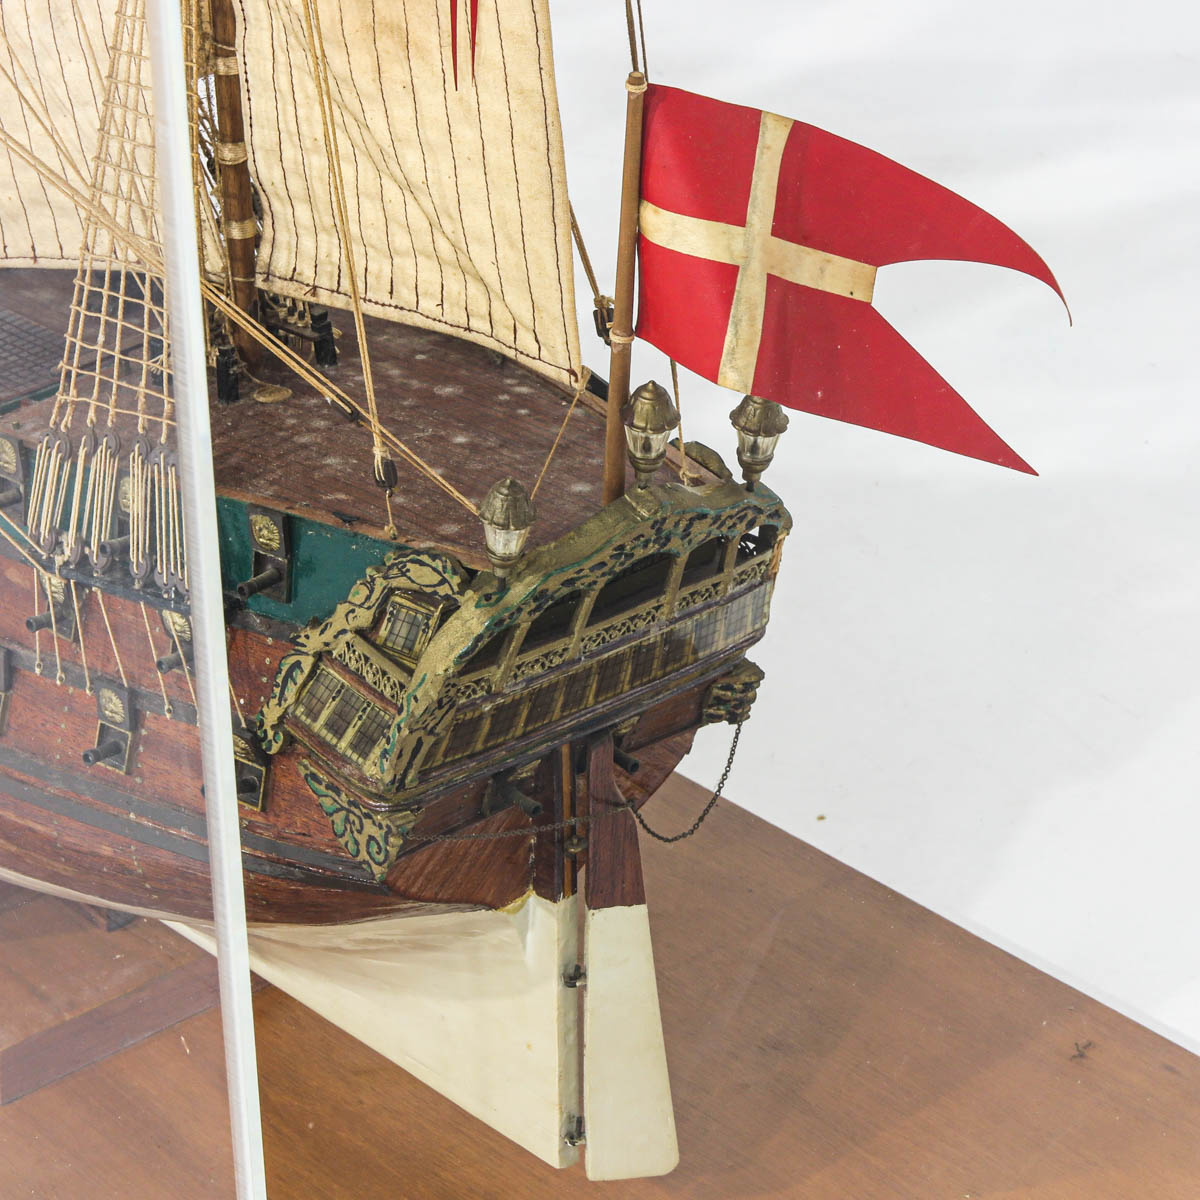 A Model Ship - Image 10 of 10